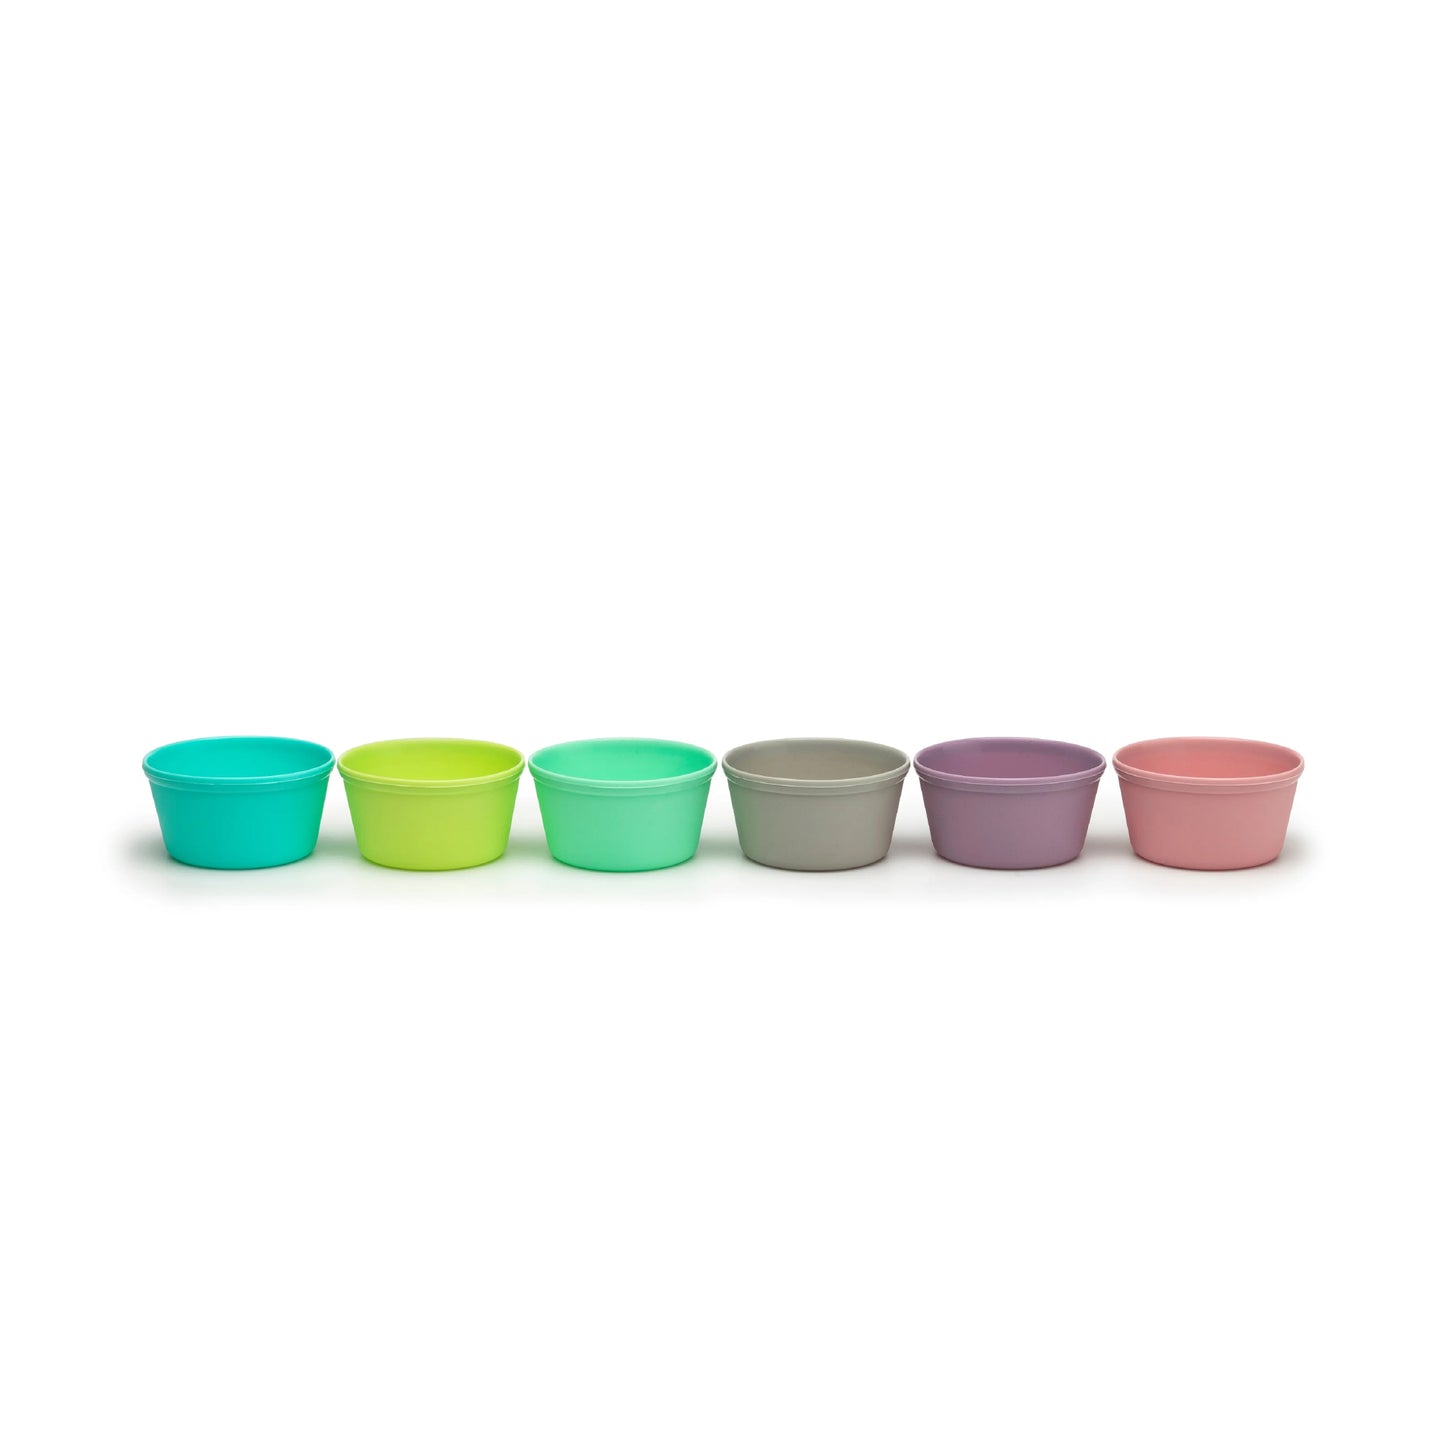 Melii Rainbow Silicone Food Cups for Kids - BPA-Free Rainbow Silicone Food Cups - un Mealtime Separation and Baking, Heat-Resistant, Dishwasher Safe